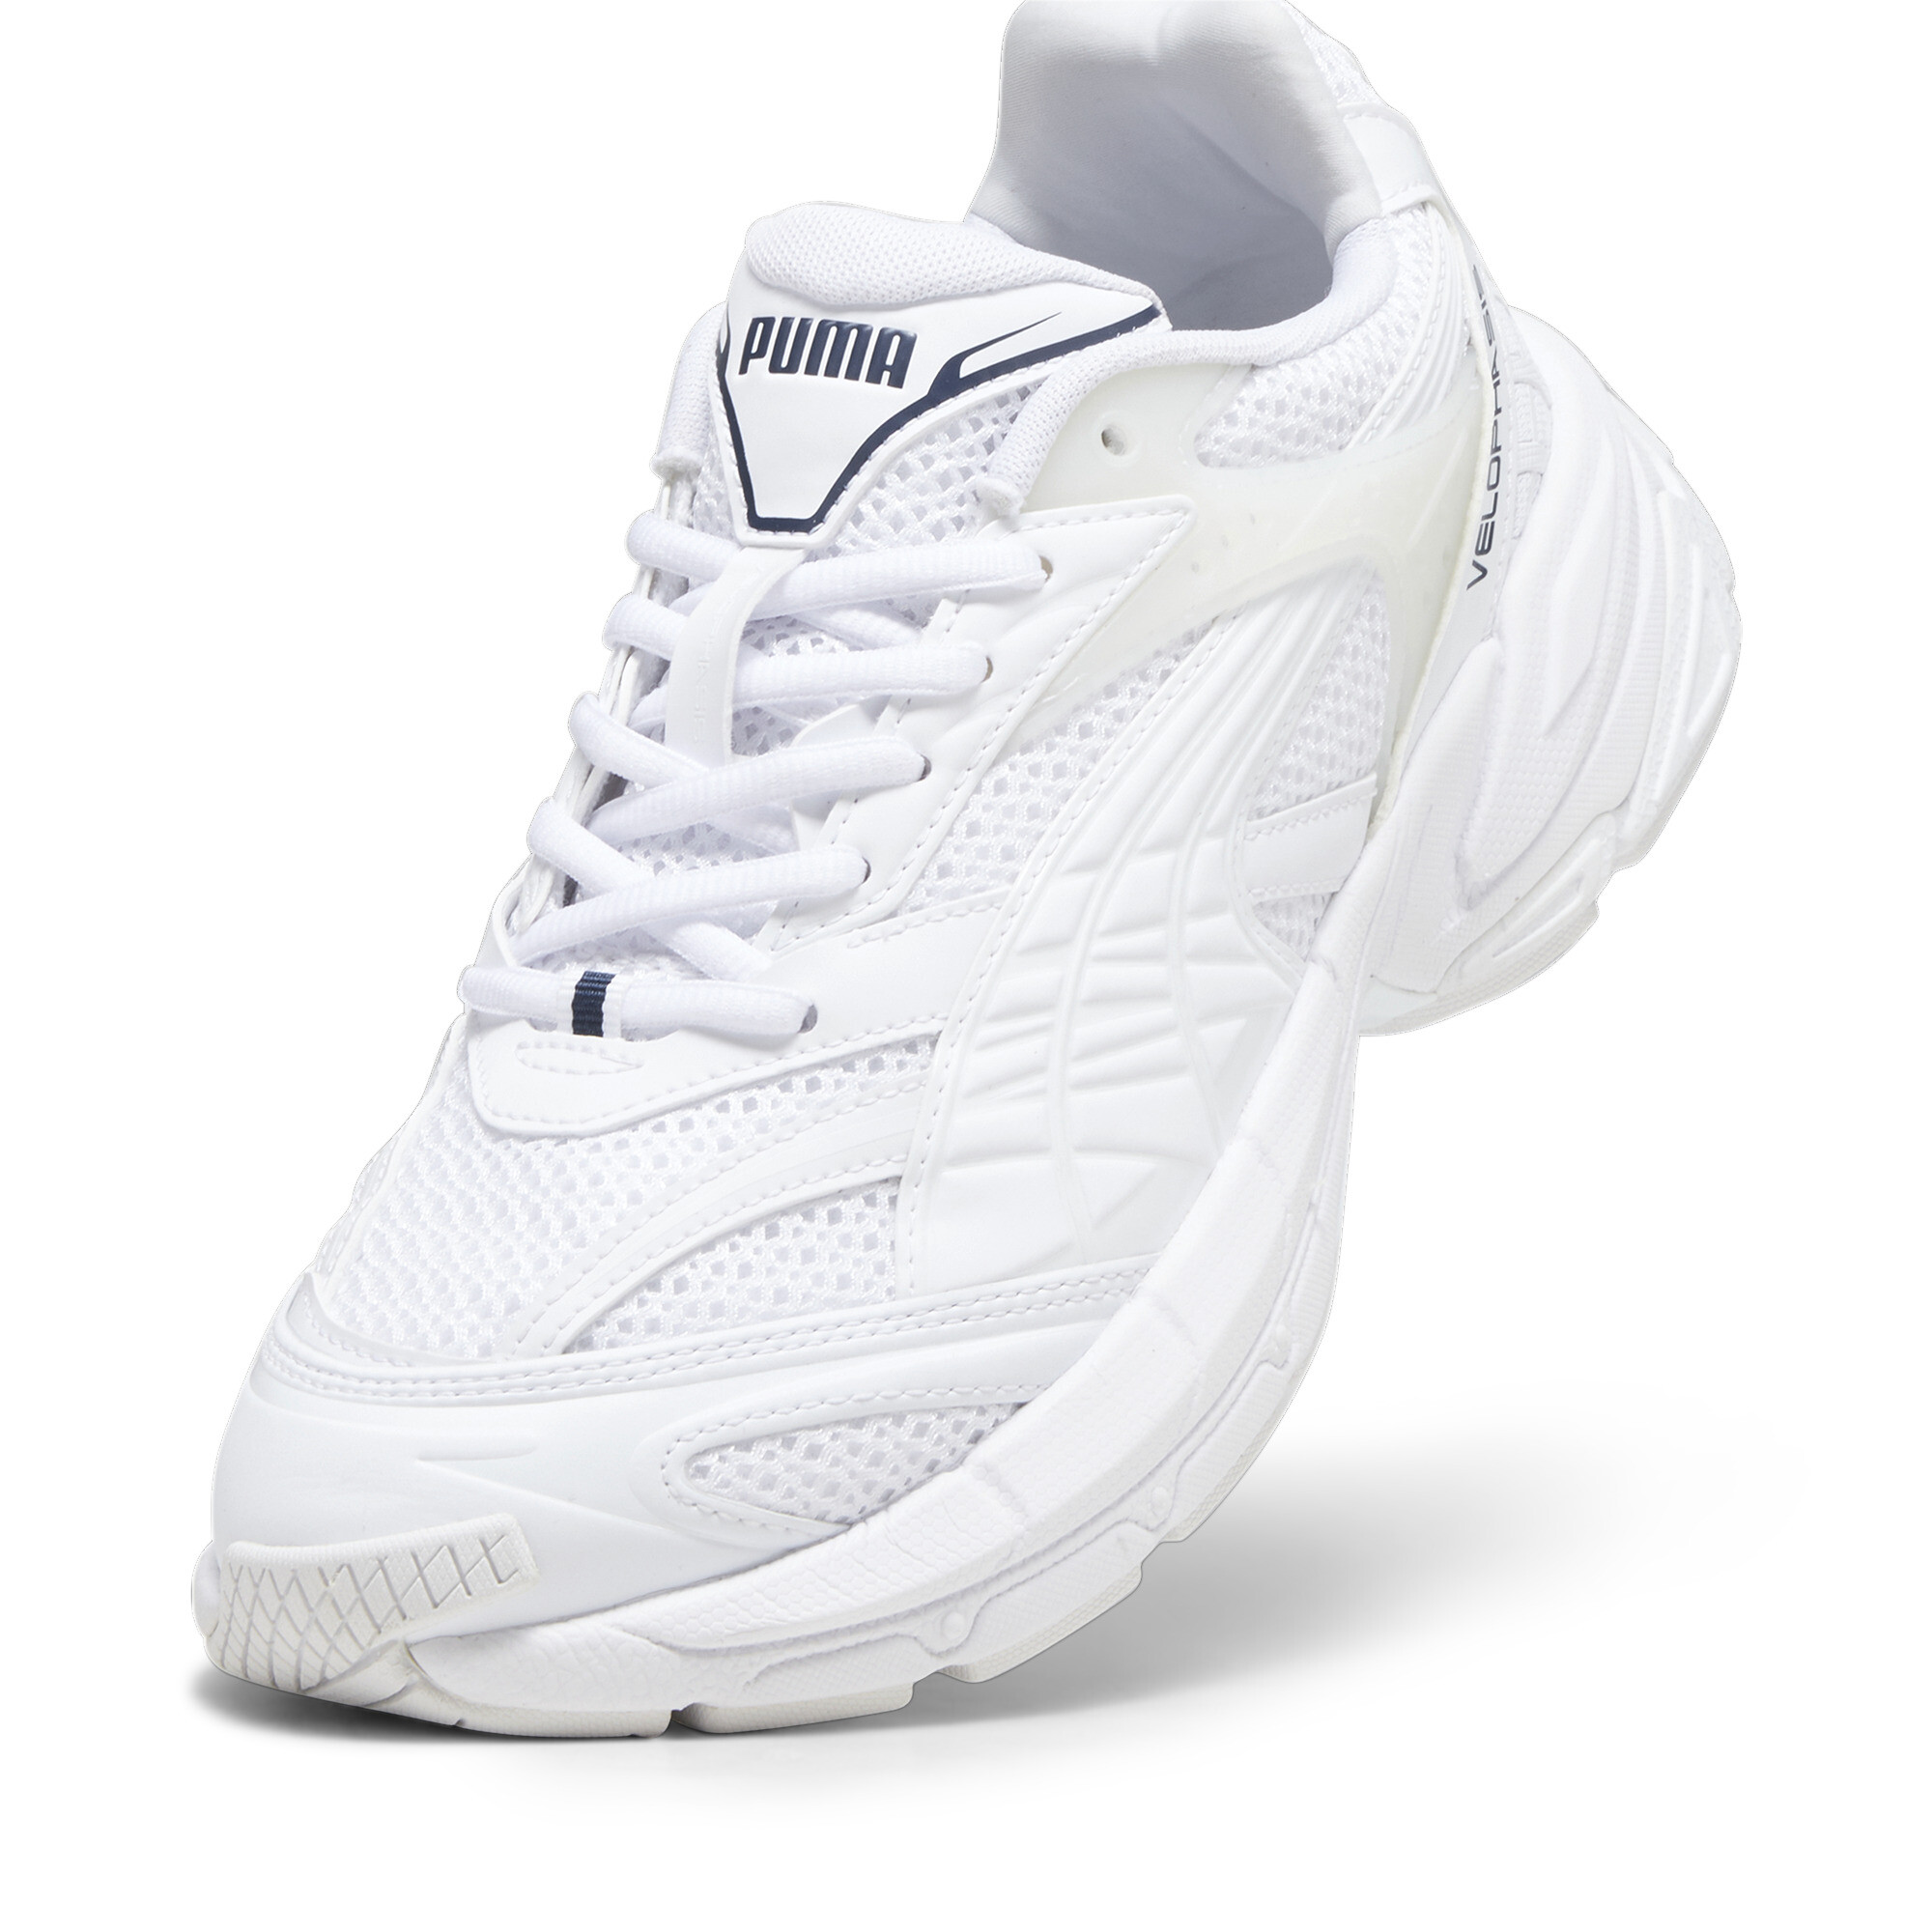 Puma Velophasis Technisch Sneakers, White, Size 42, Shoes